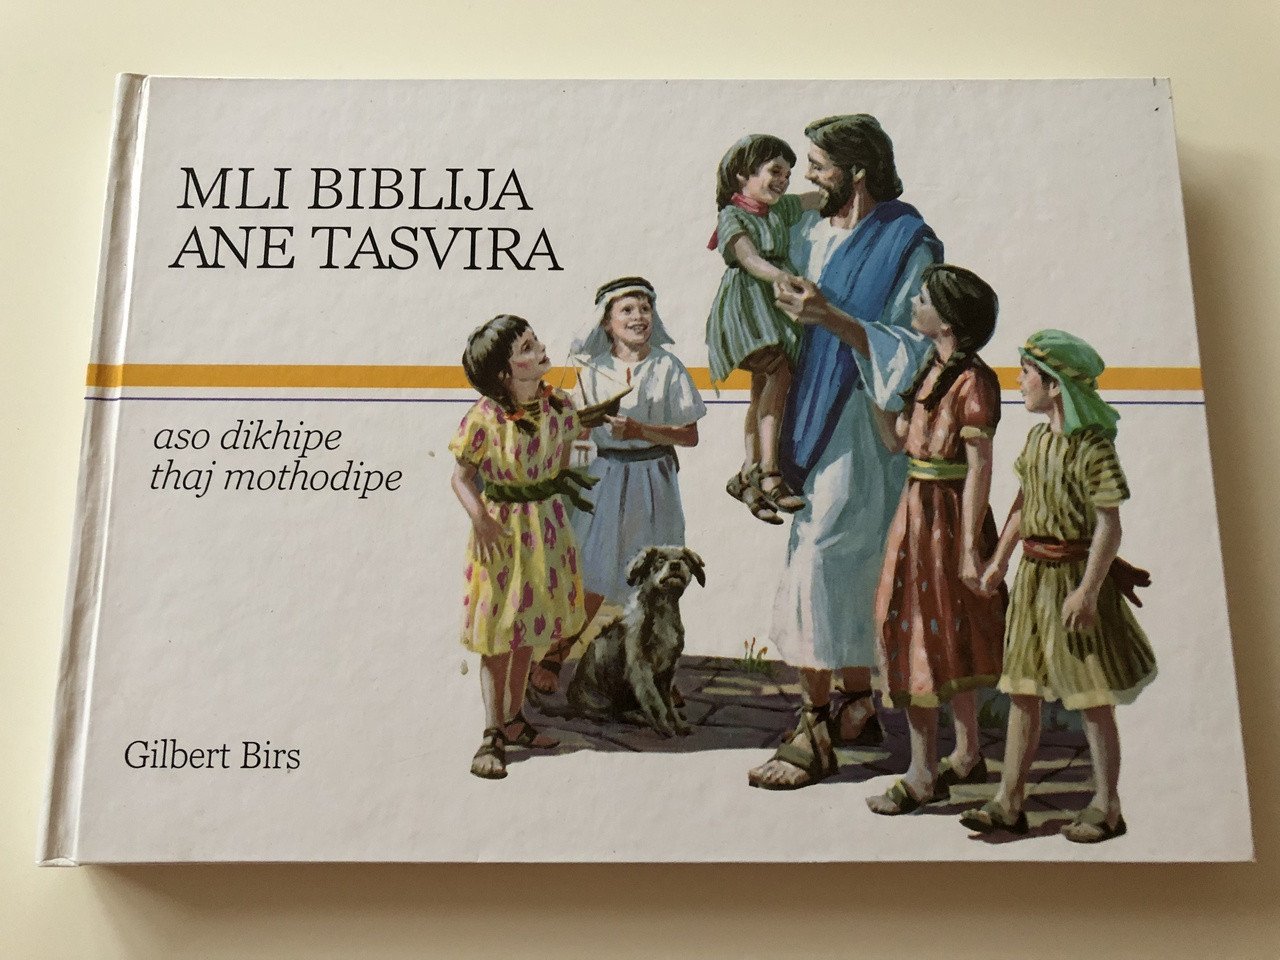 101 Pi Bél Istwa Nan Bib la by Ura Miller / Haitian Creole edition of 101  Favorite Stories from the Bible / Illustrations by Gloria Oostema /  Hardcover / TGS International 